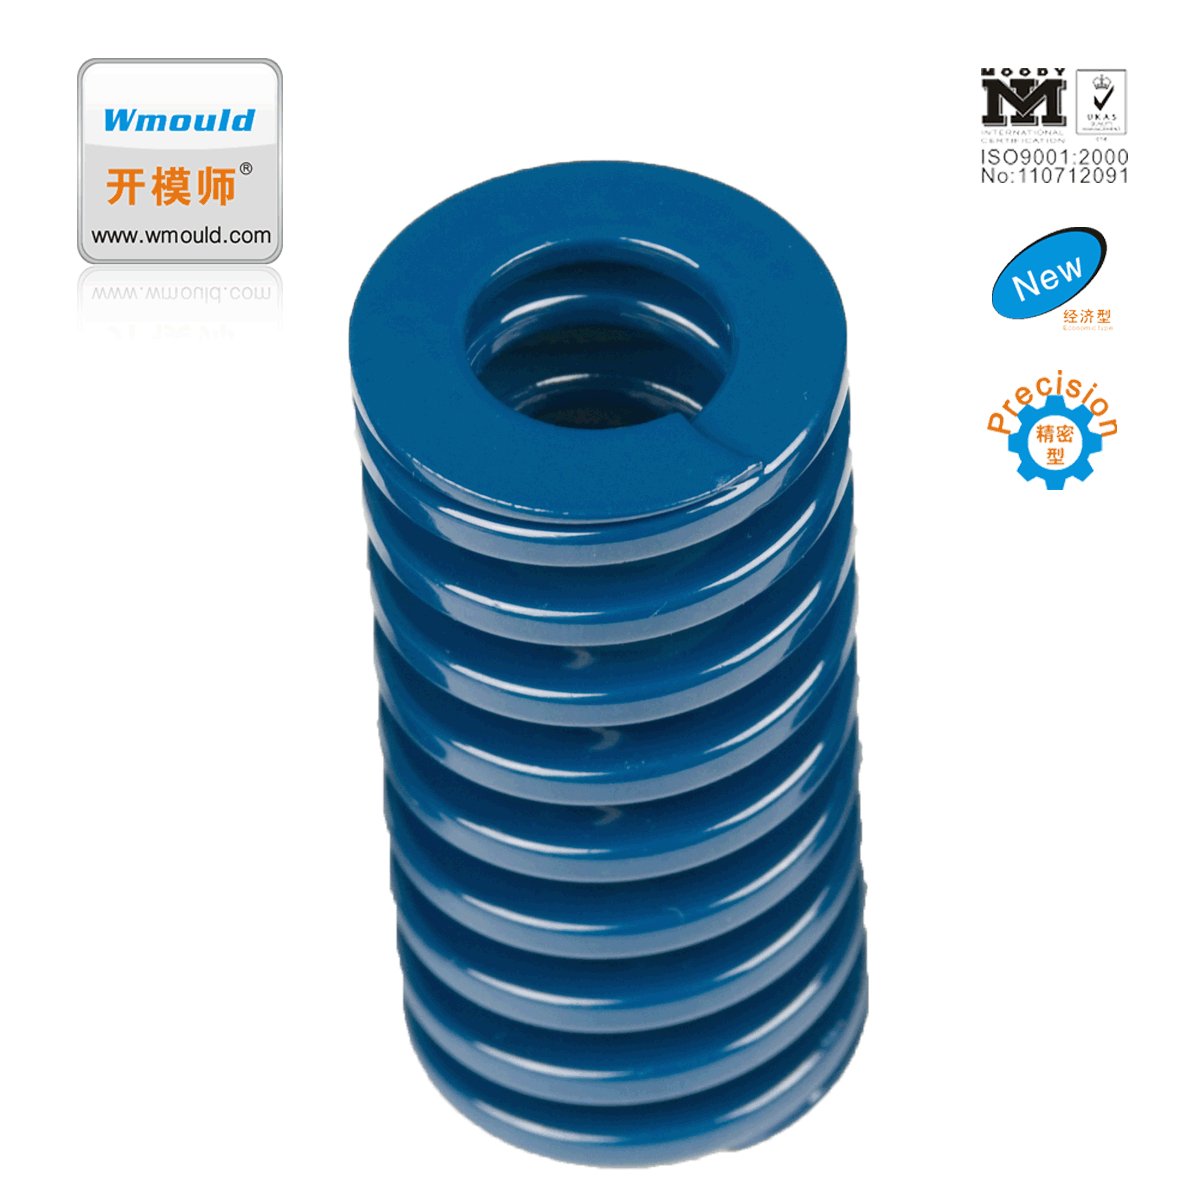 Mold standard parts coil spring 4